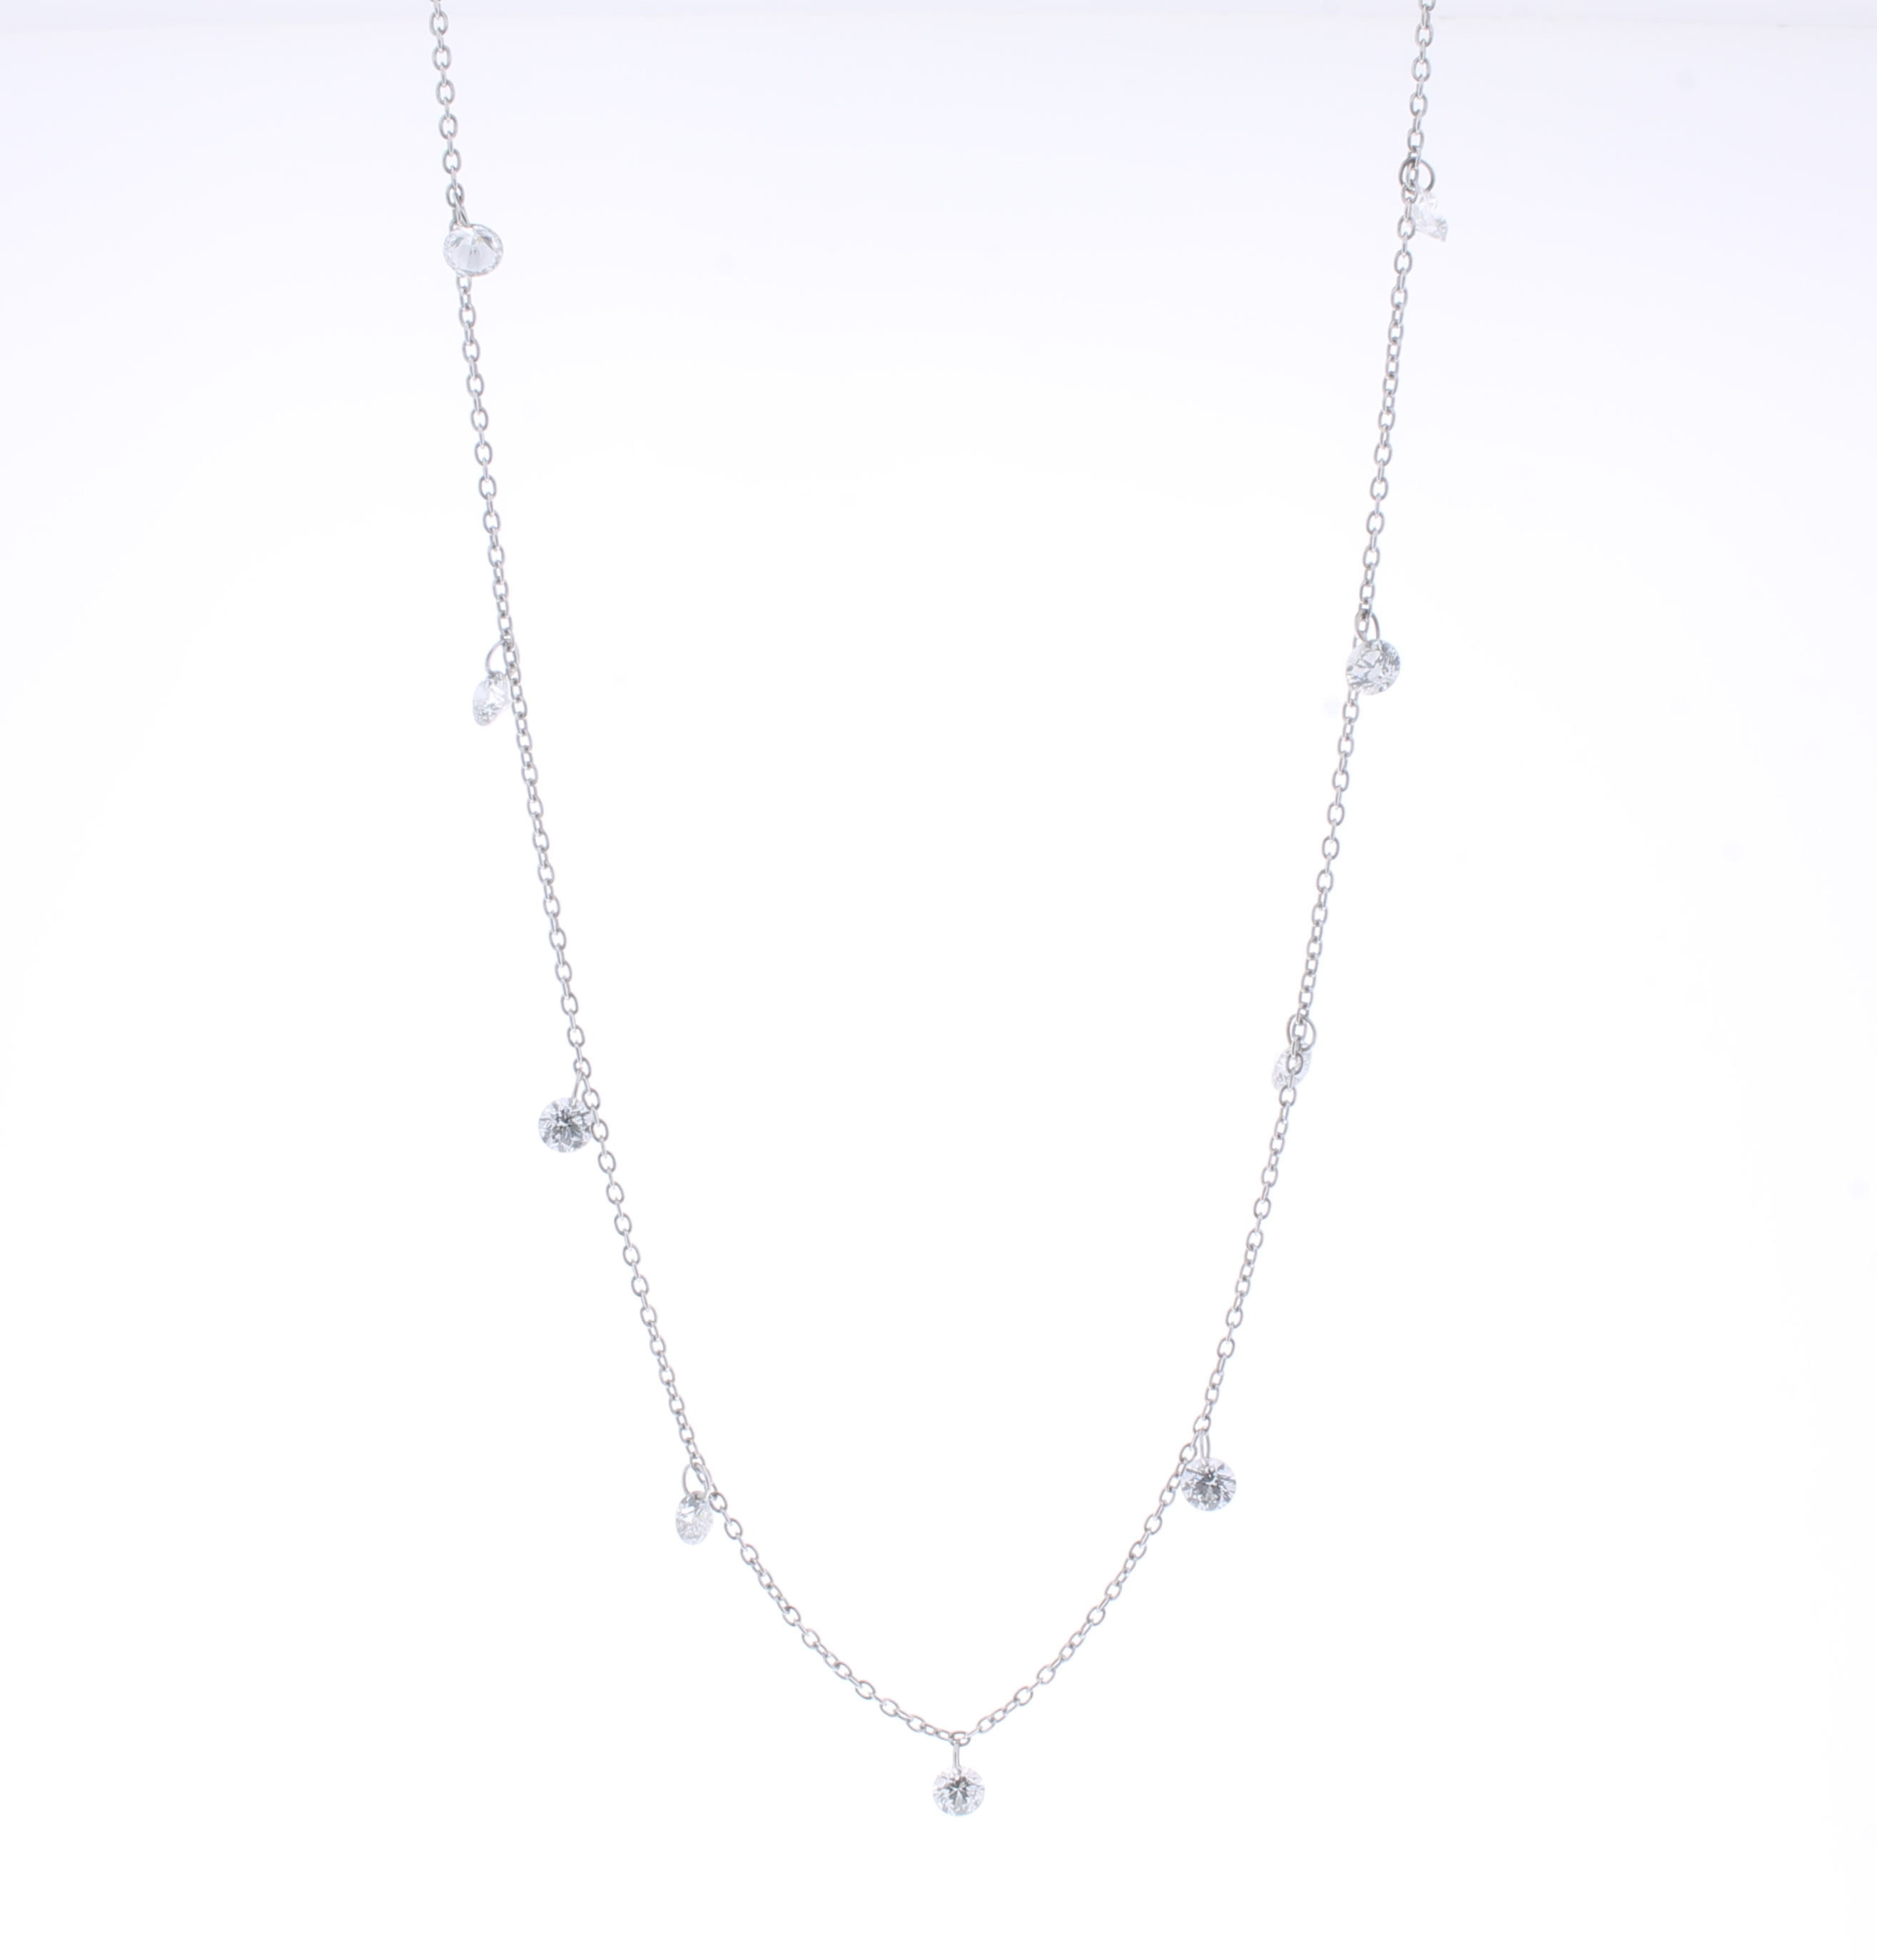 Penny Preville 18k white gold rhodium plated 9 station dangle drilled diamond necklace weighing 1.80 carat total weight